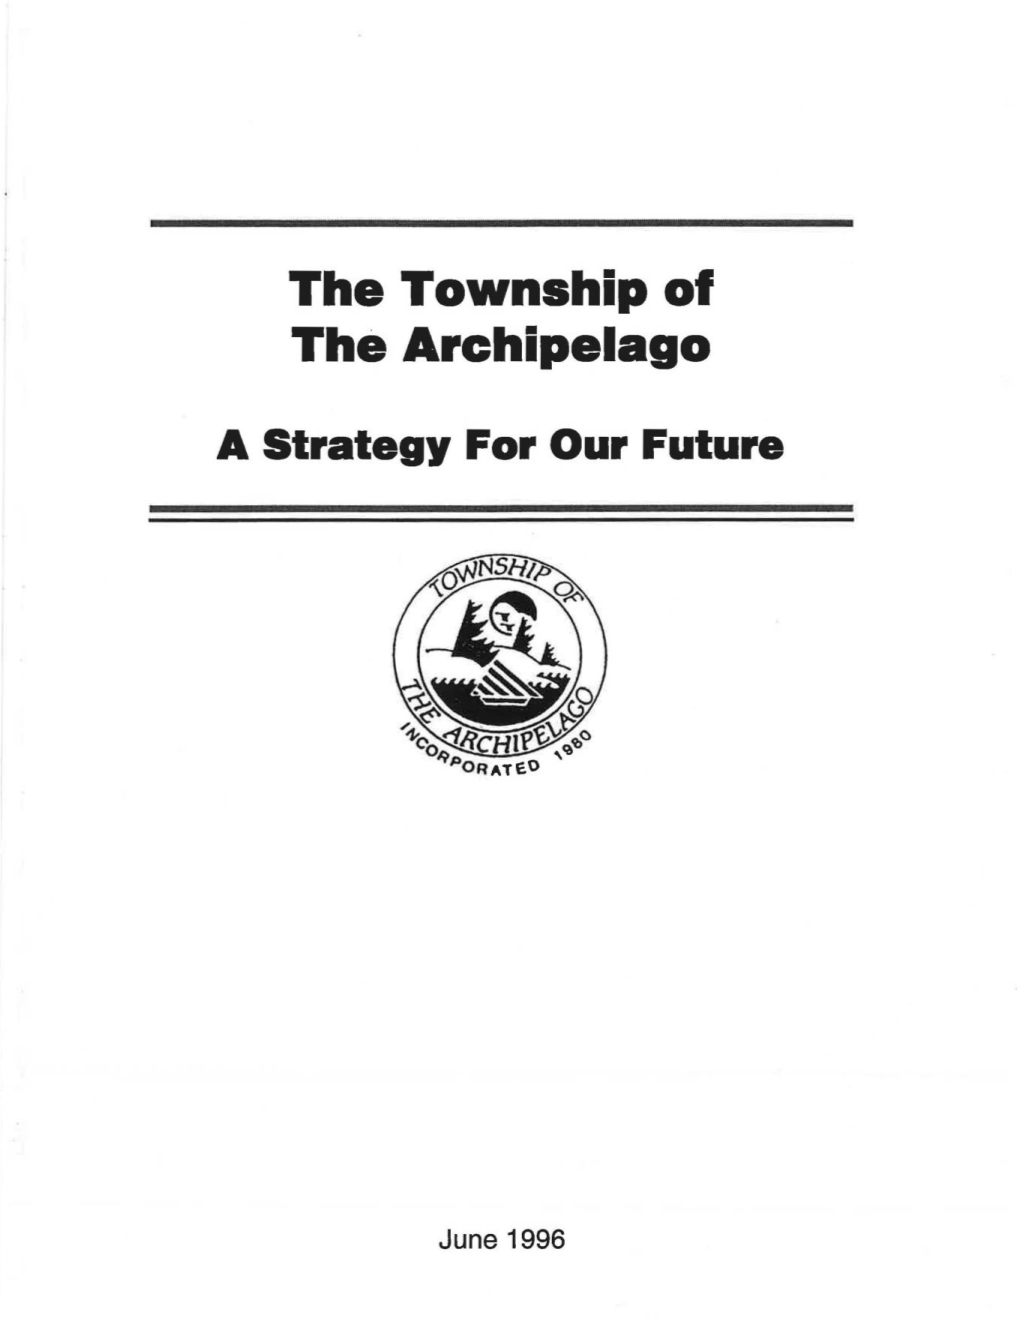 Ill. the Township of the Archipelago: a Strategy for the Future